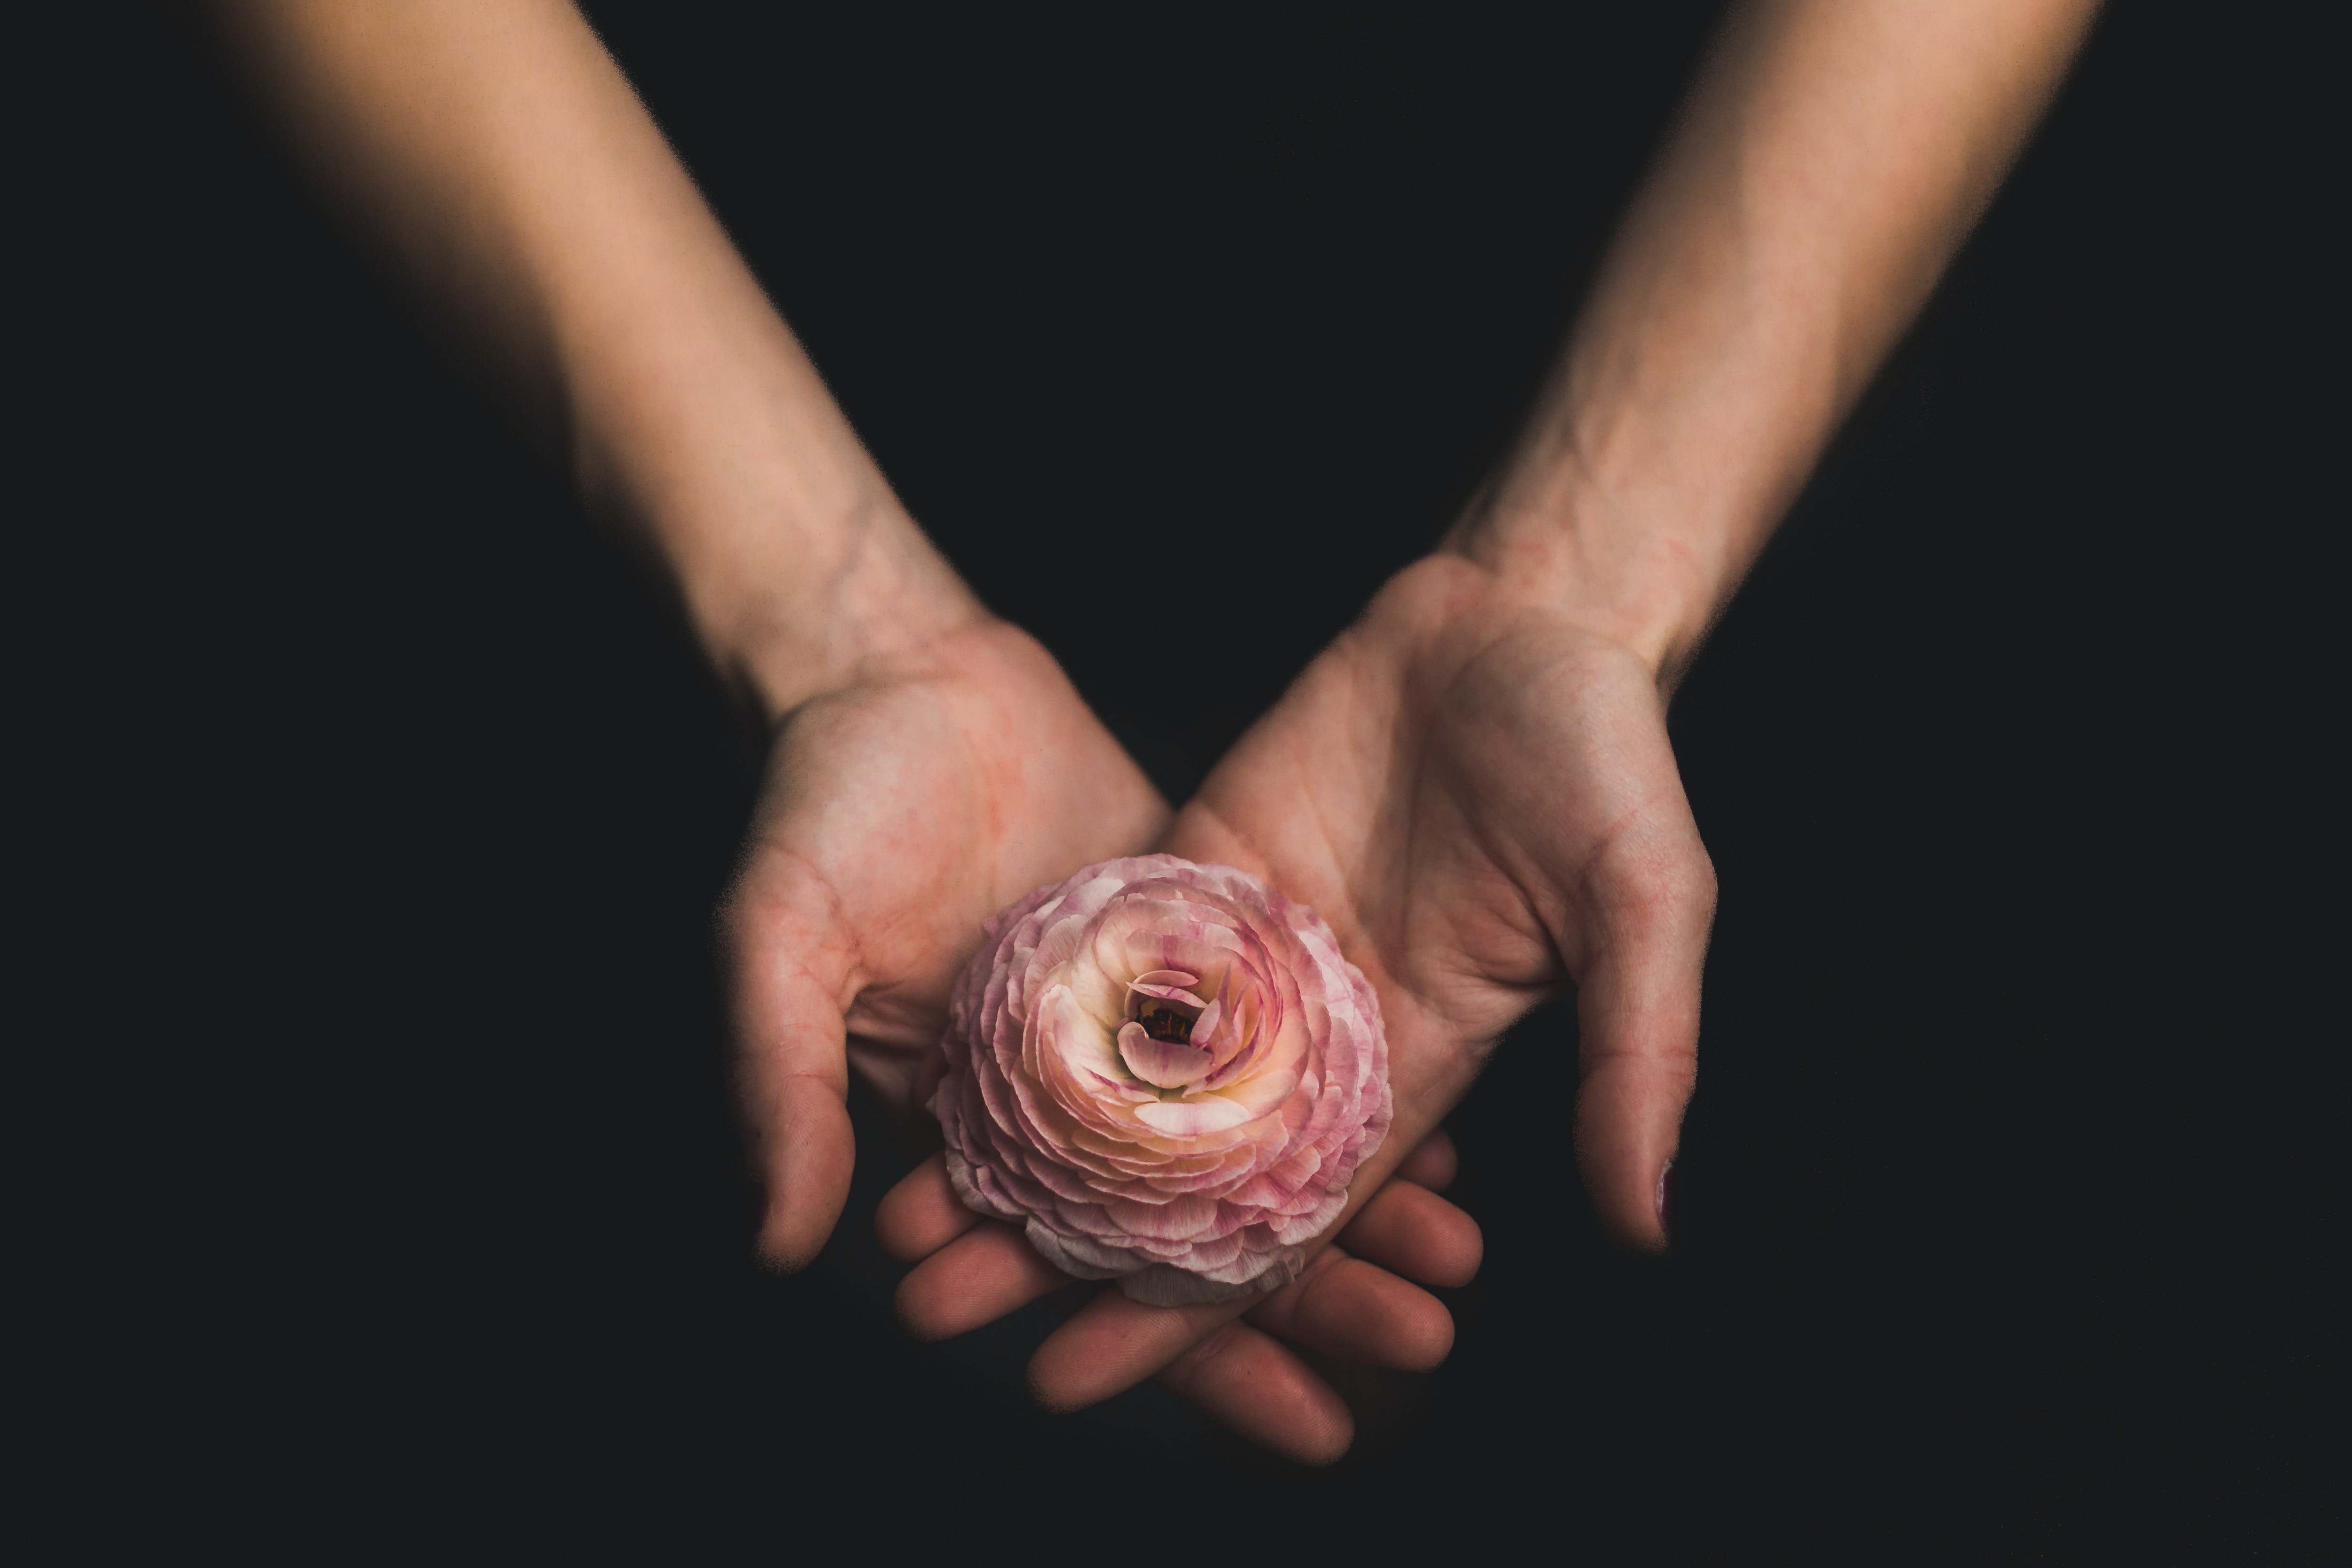 An individual cupping a flower in their hands. │ Source: Unsplash